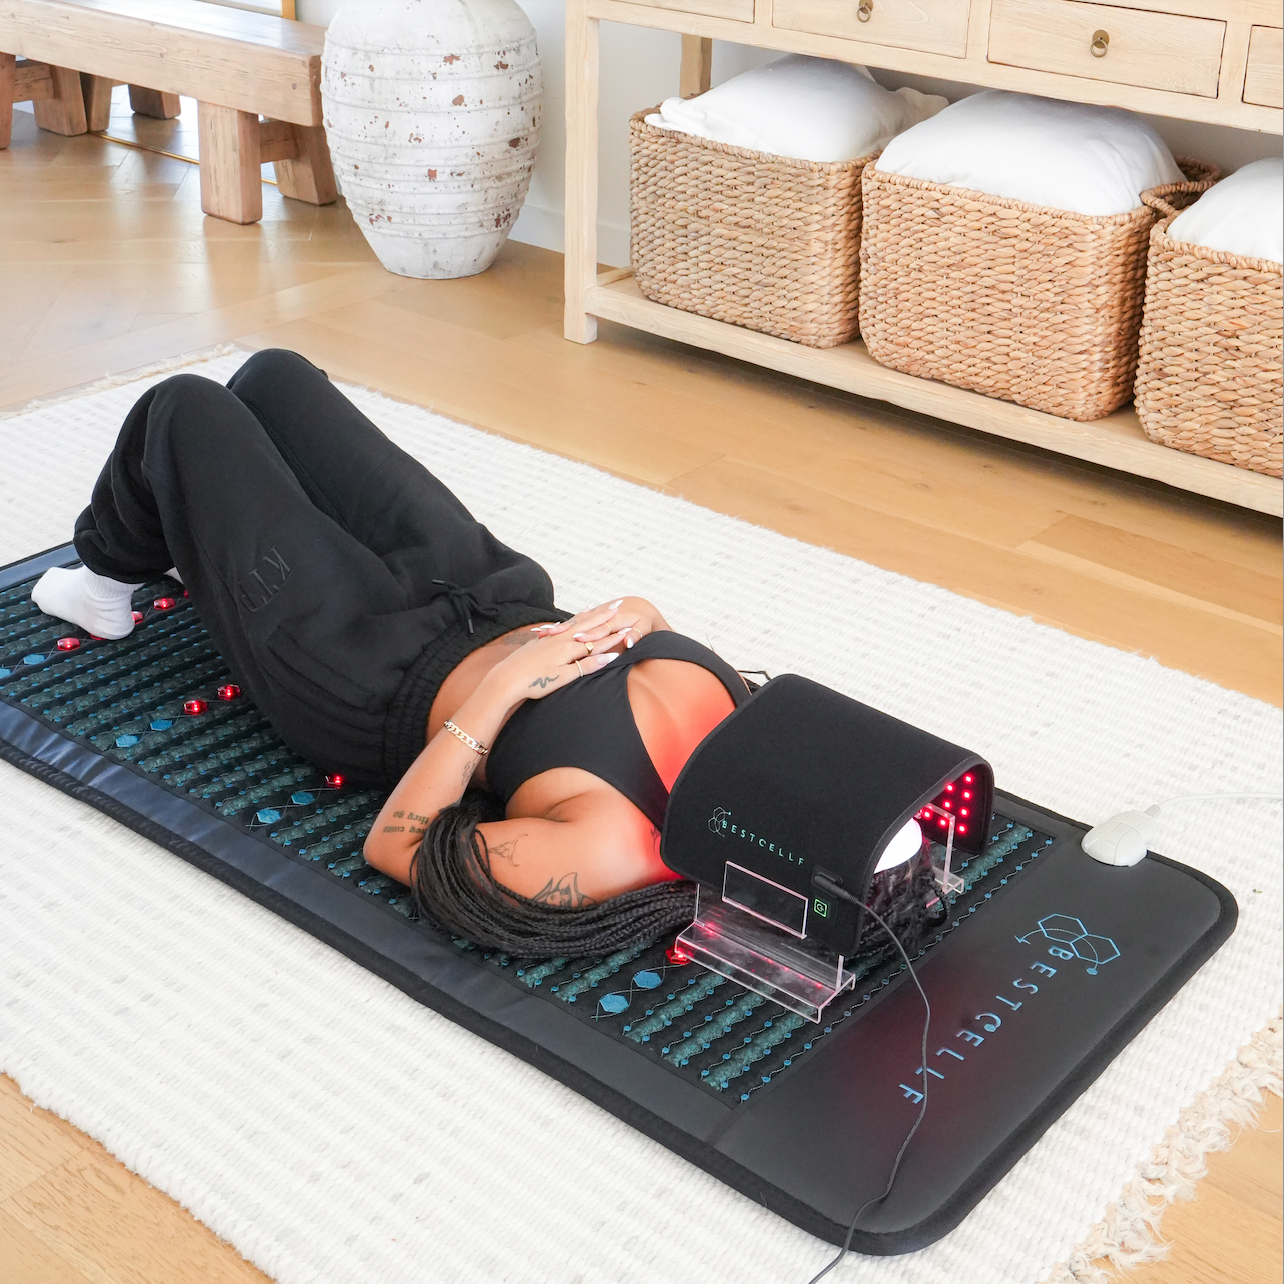 Eisha using hte red light wrap and PEMF mat by BEST CELLF